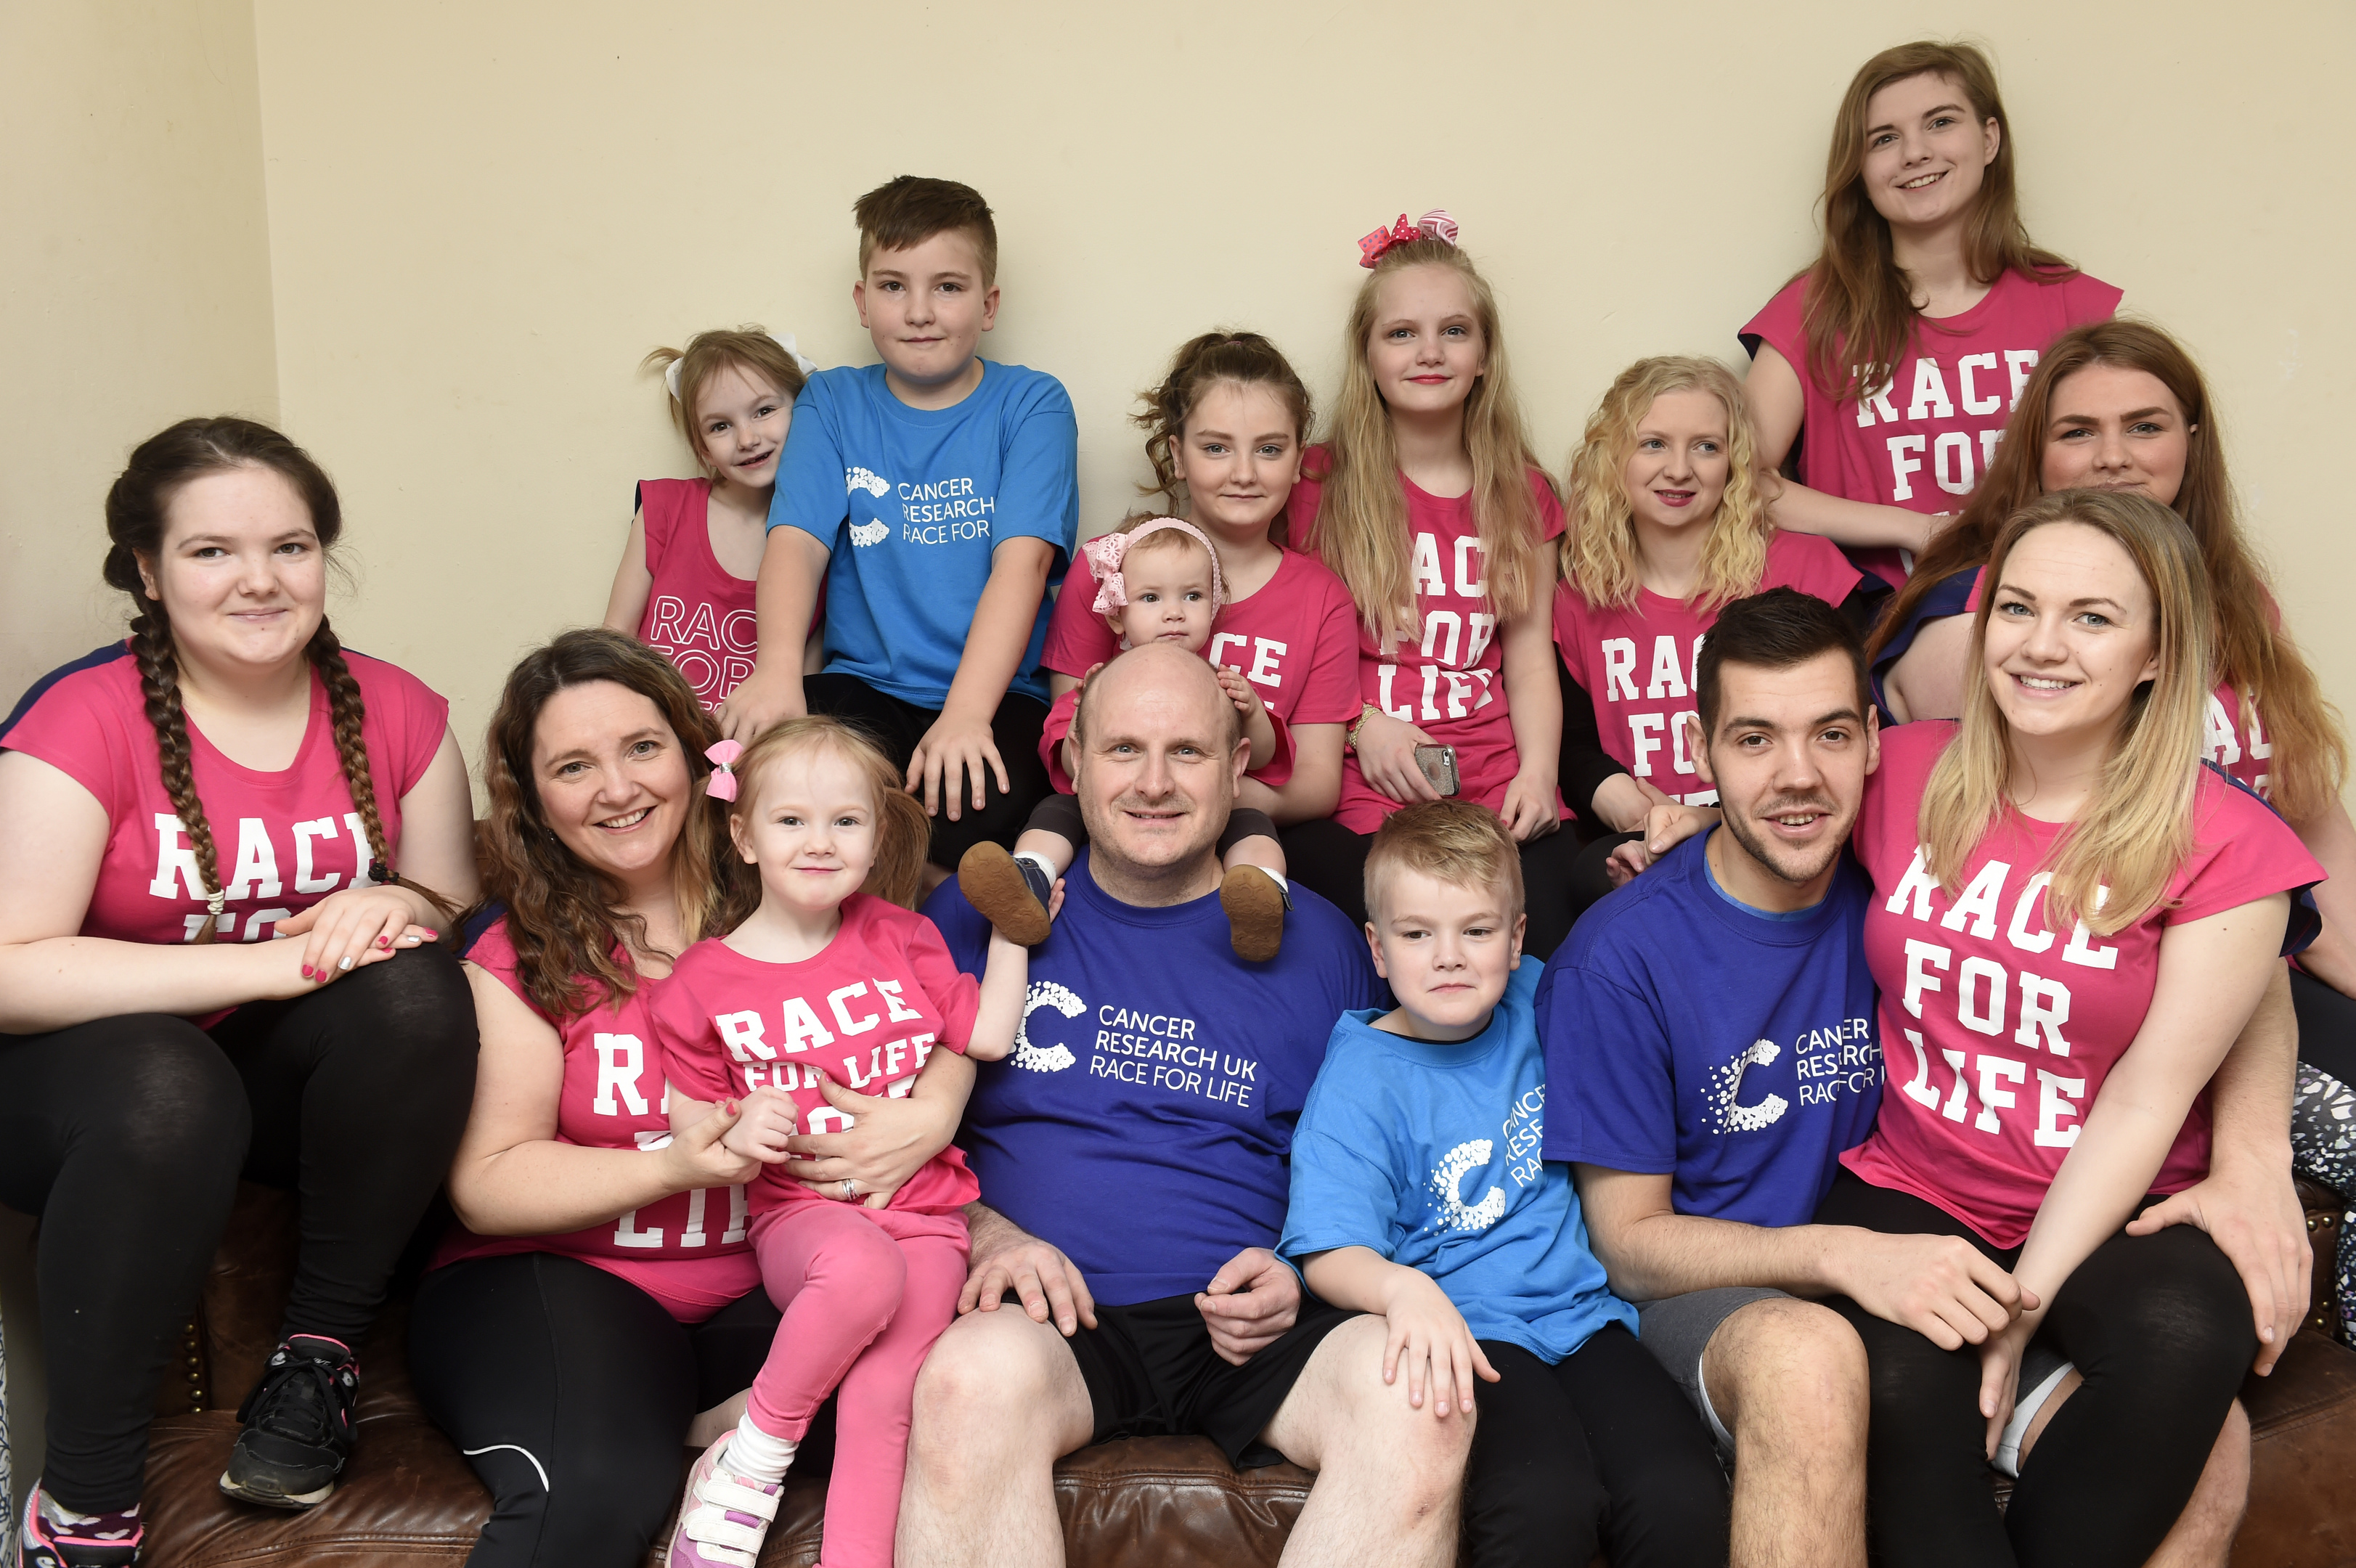 Scotland’s superfamily, Emma and Roy Hann have been chosen to help launch in Scotland Race for Life Family 5K- a Race for Life event which for the first time allows MEN to take part.